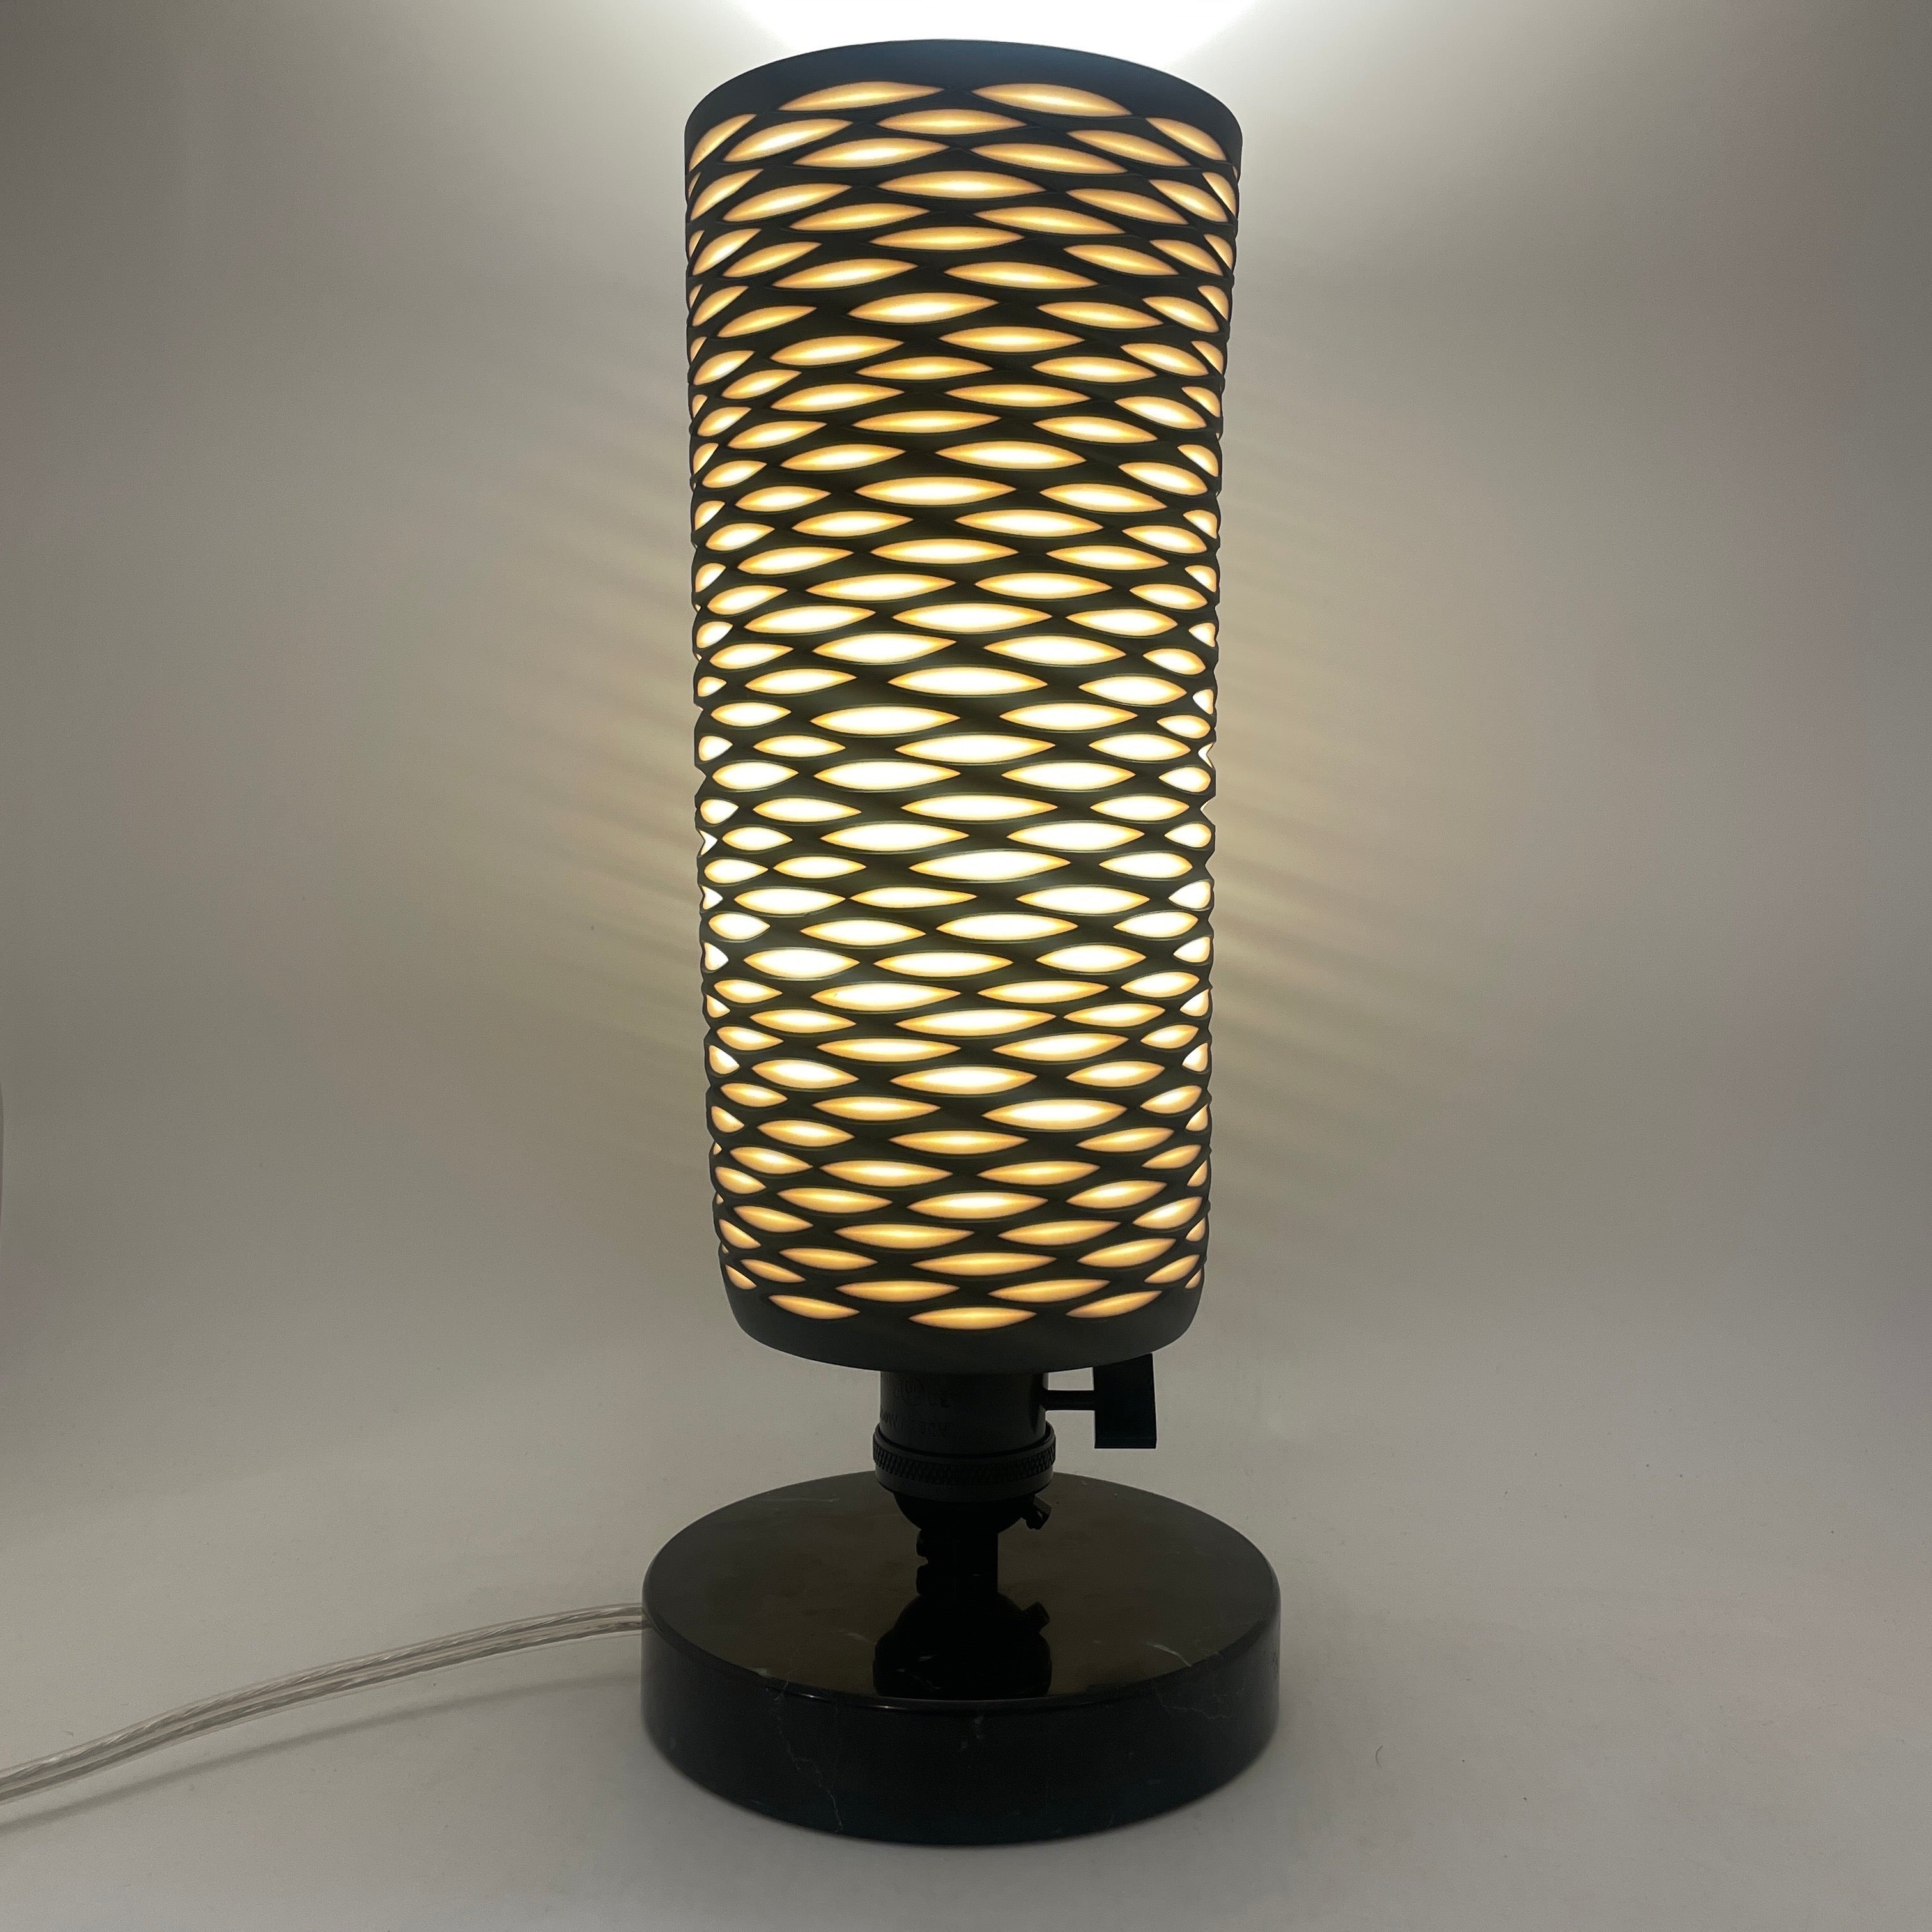 Table Lamp- "Mesh" Black and White Hand-carved Porcelain Shade with Choice of Base (ready to ship)